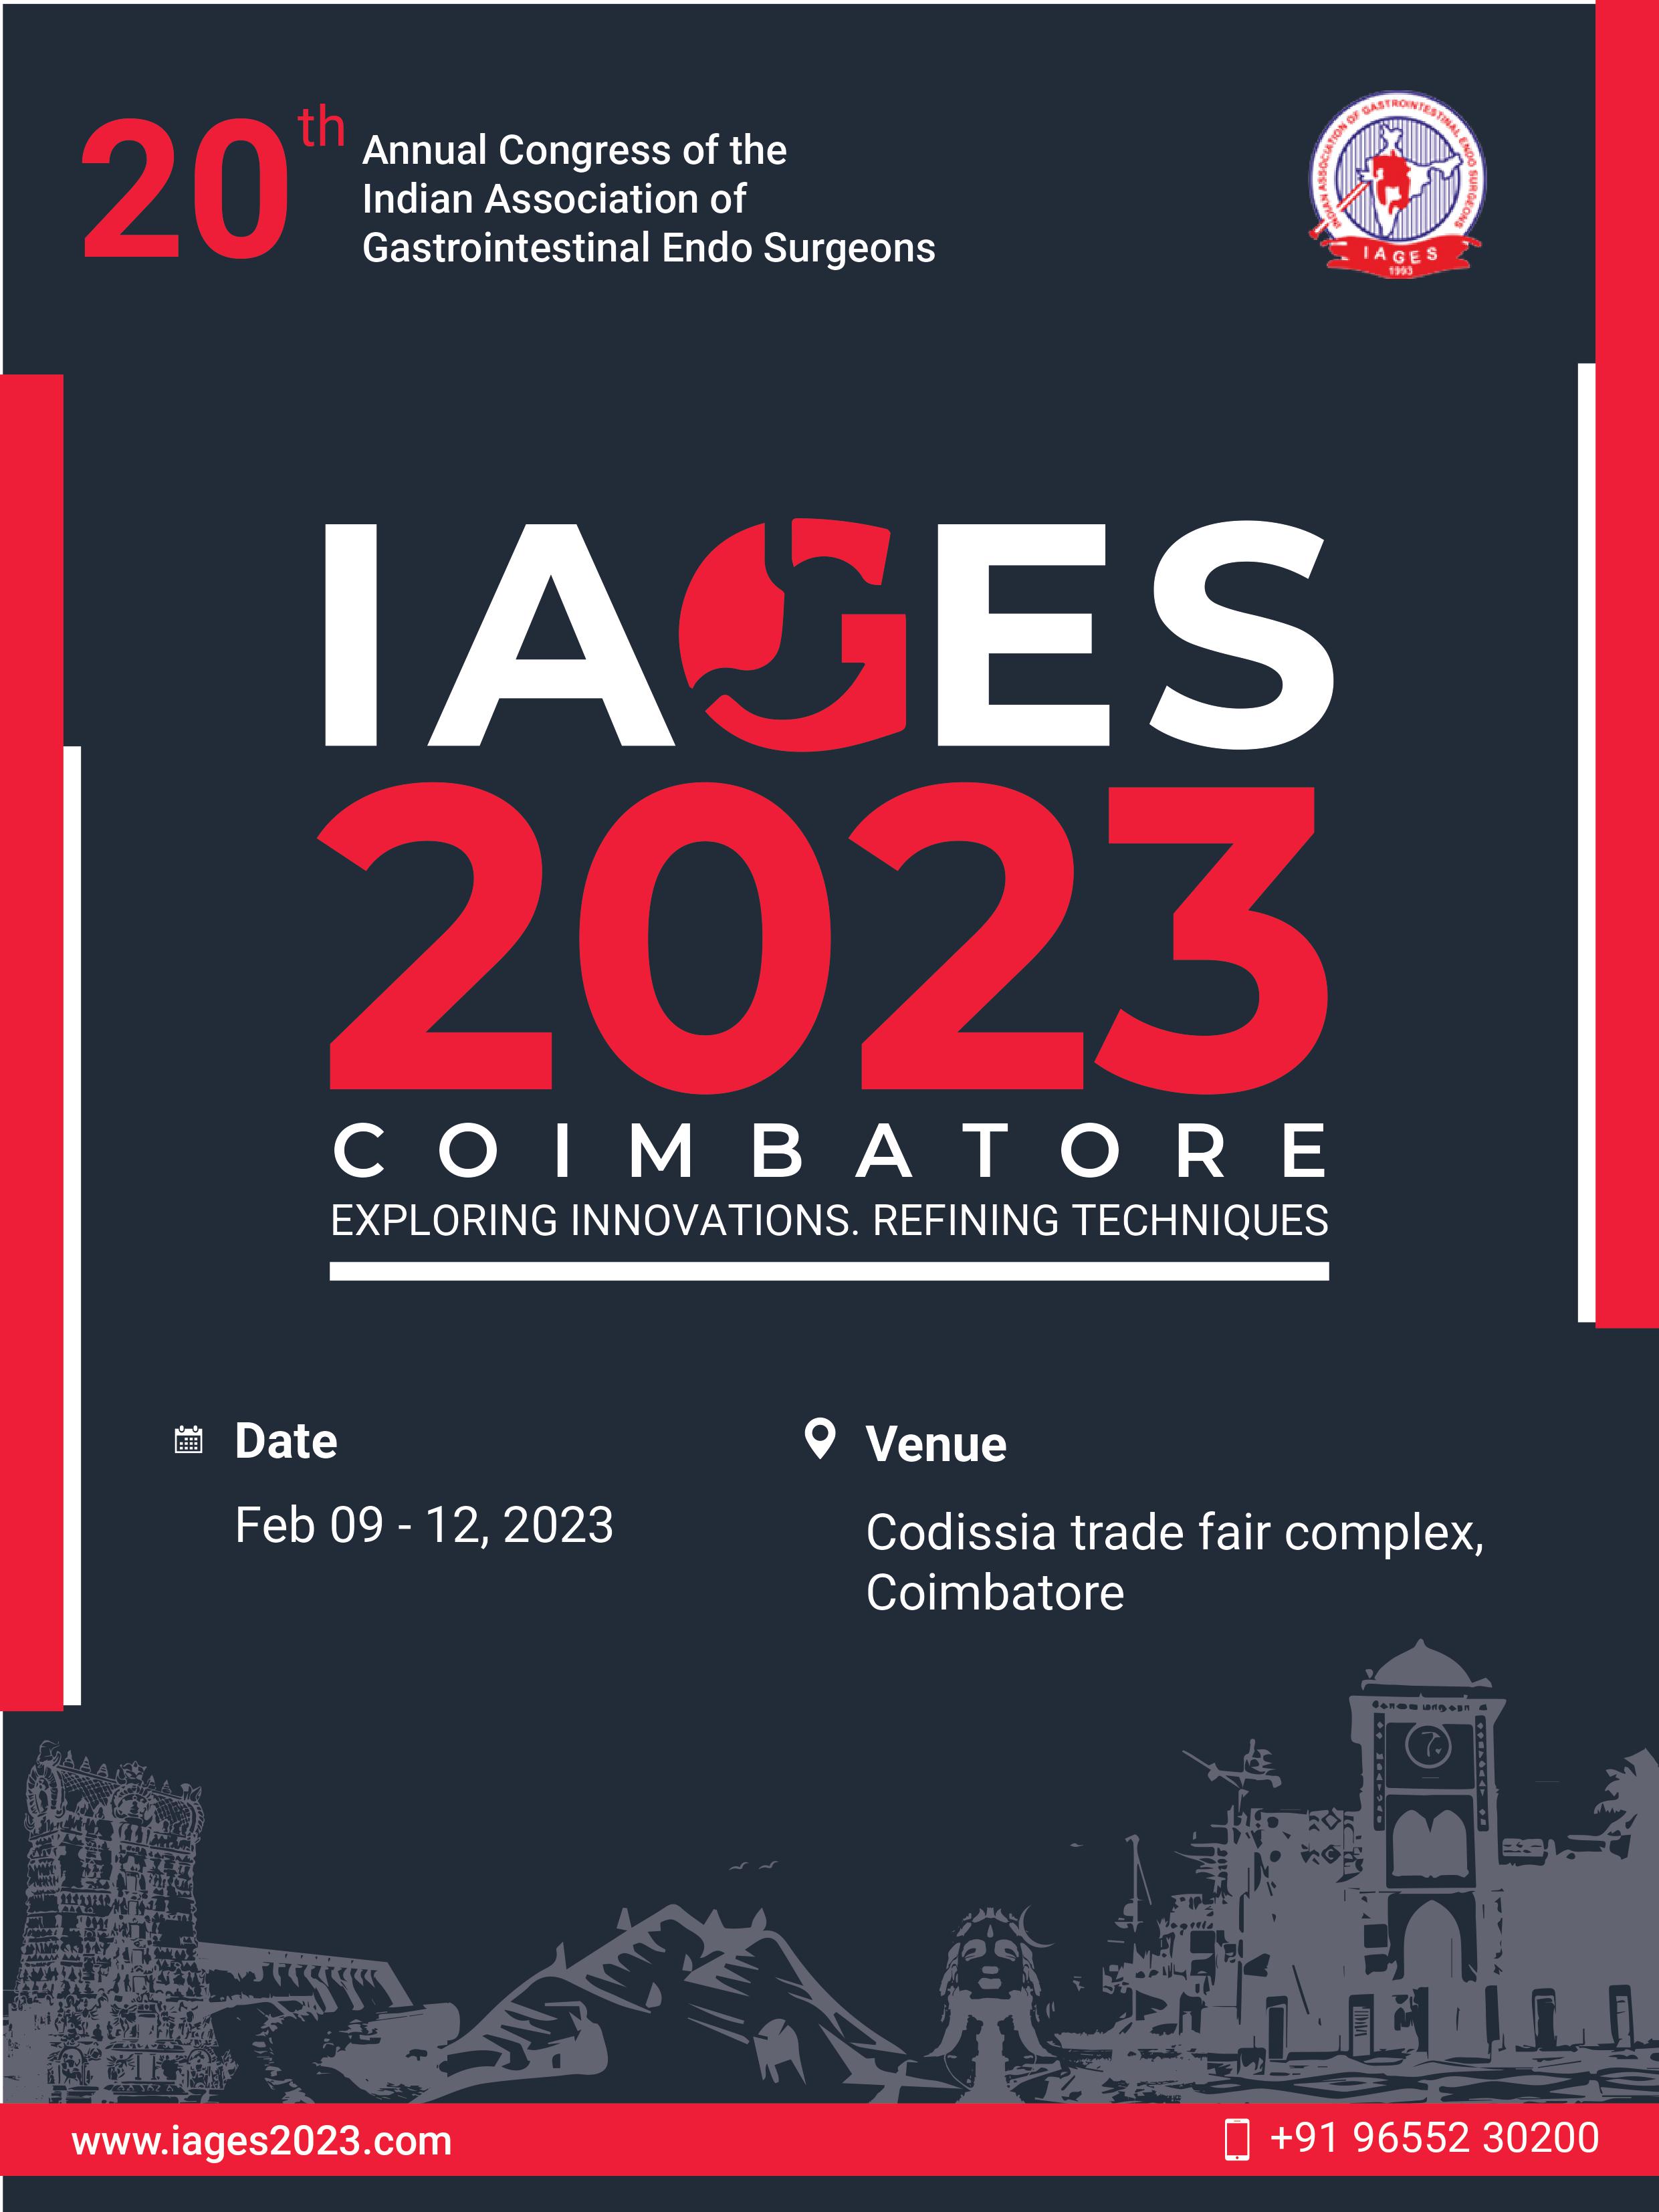 IAGES 2022